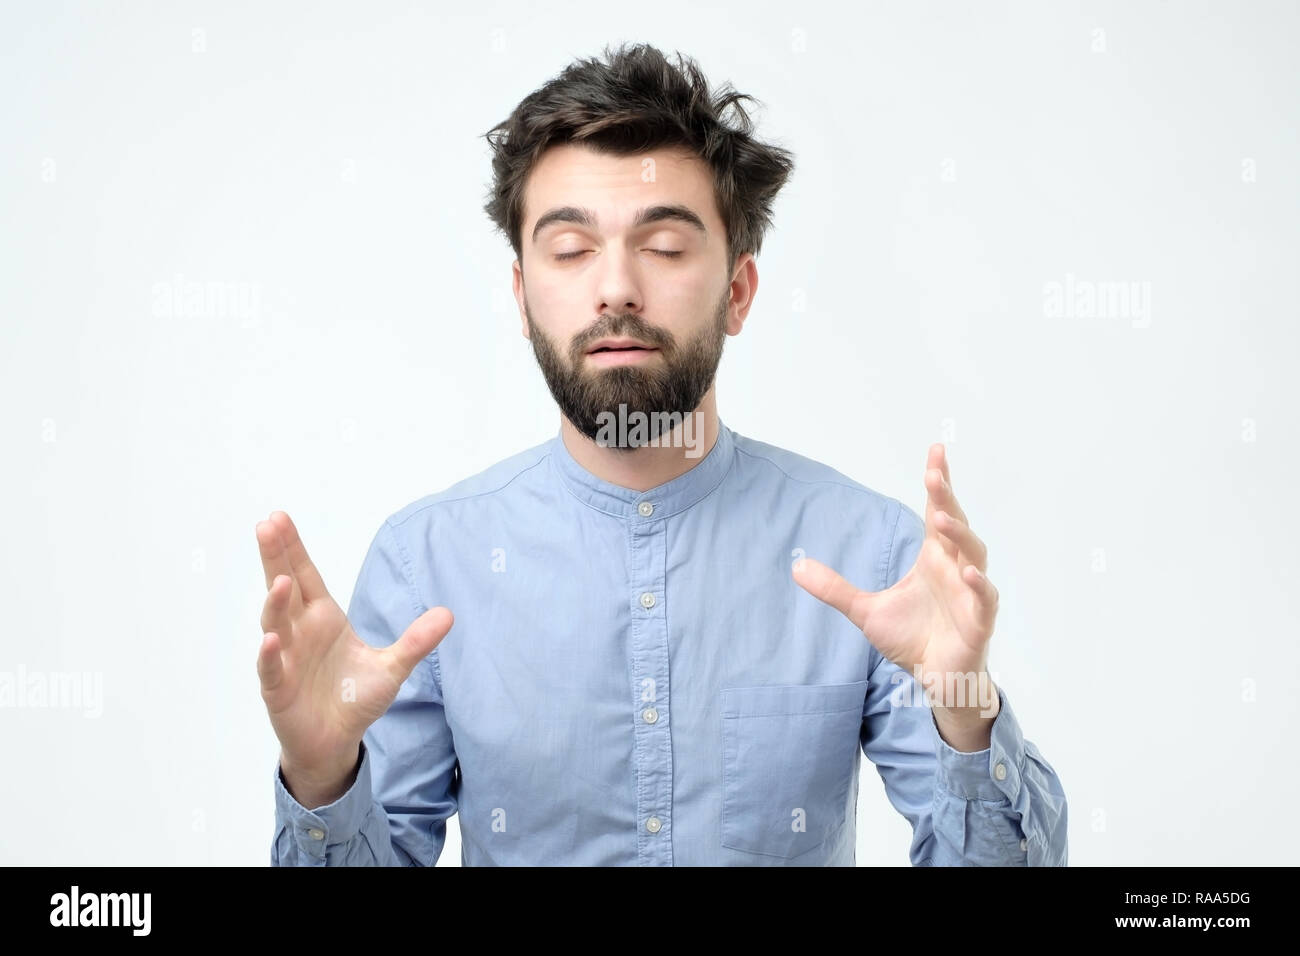 Unsatisfied sleepy guy with messy hair standing over gray background. Stock Photo